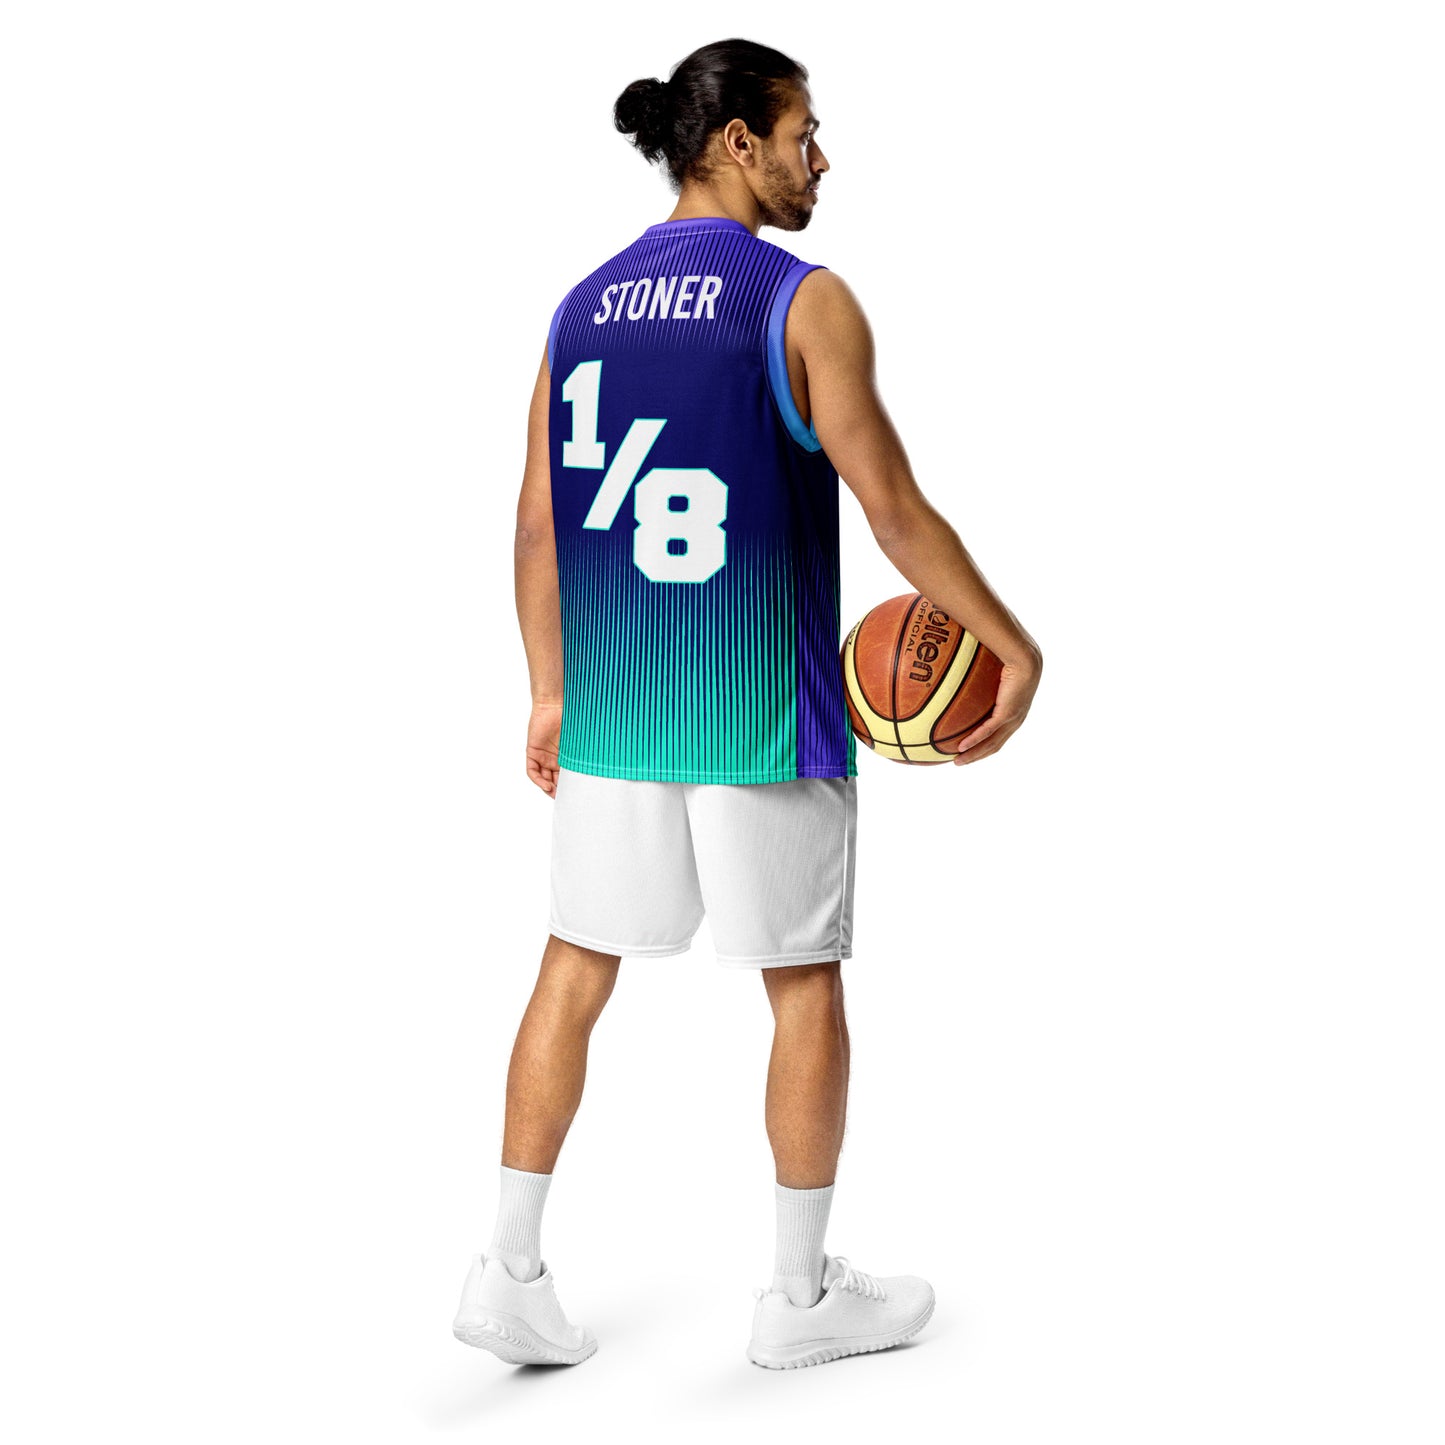 Northern Lights Recycled Unisex Basketball Jersey